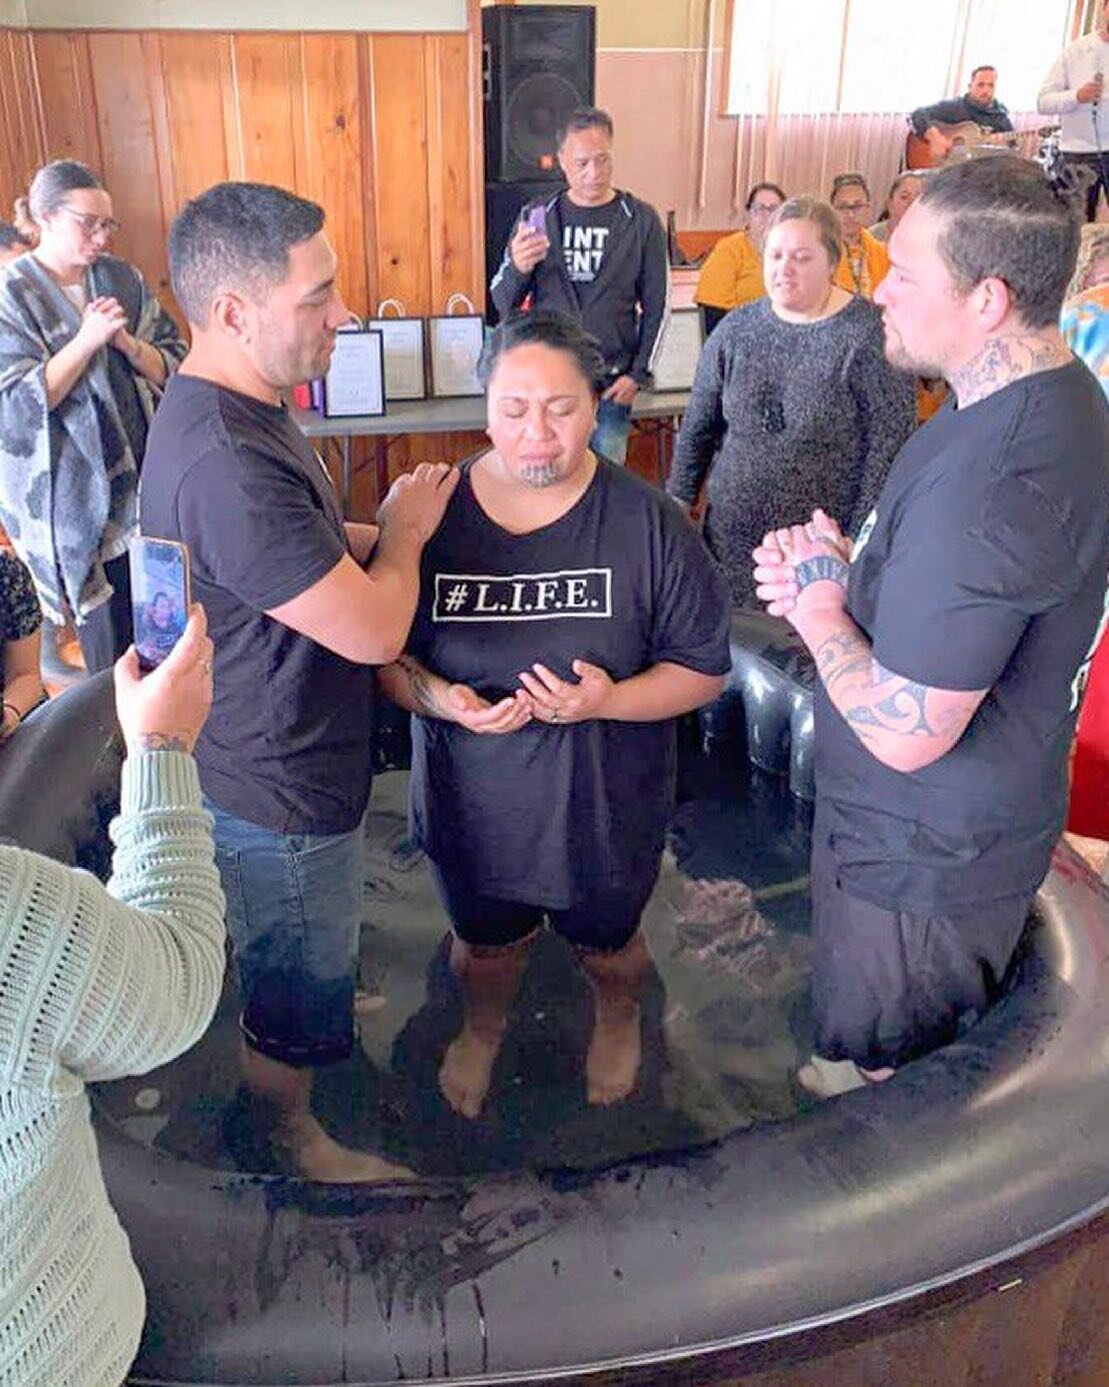 Ahiahi mārie! This last weekend at the Meeting Place in Gisbourne, 16 baptisms, 2 salvations, and 2 baby dedications happened coming off the back of a Spirit filled and very special weekend. These are the things of the Kingdom we love to celebrate wi